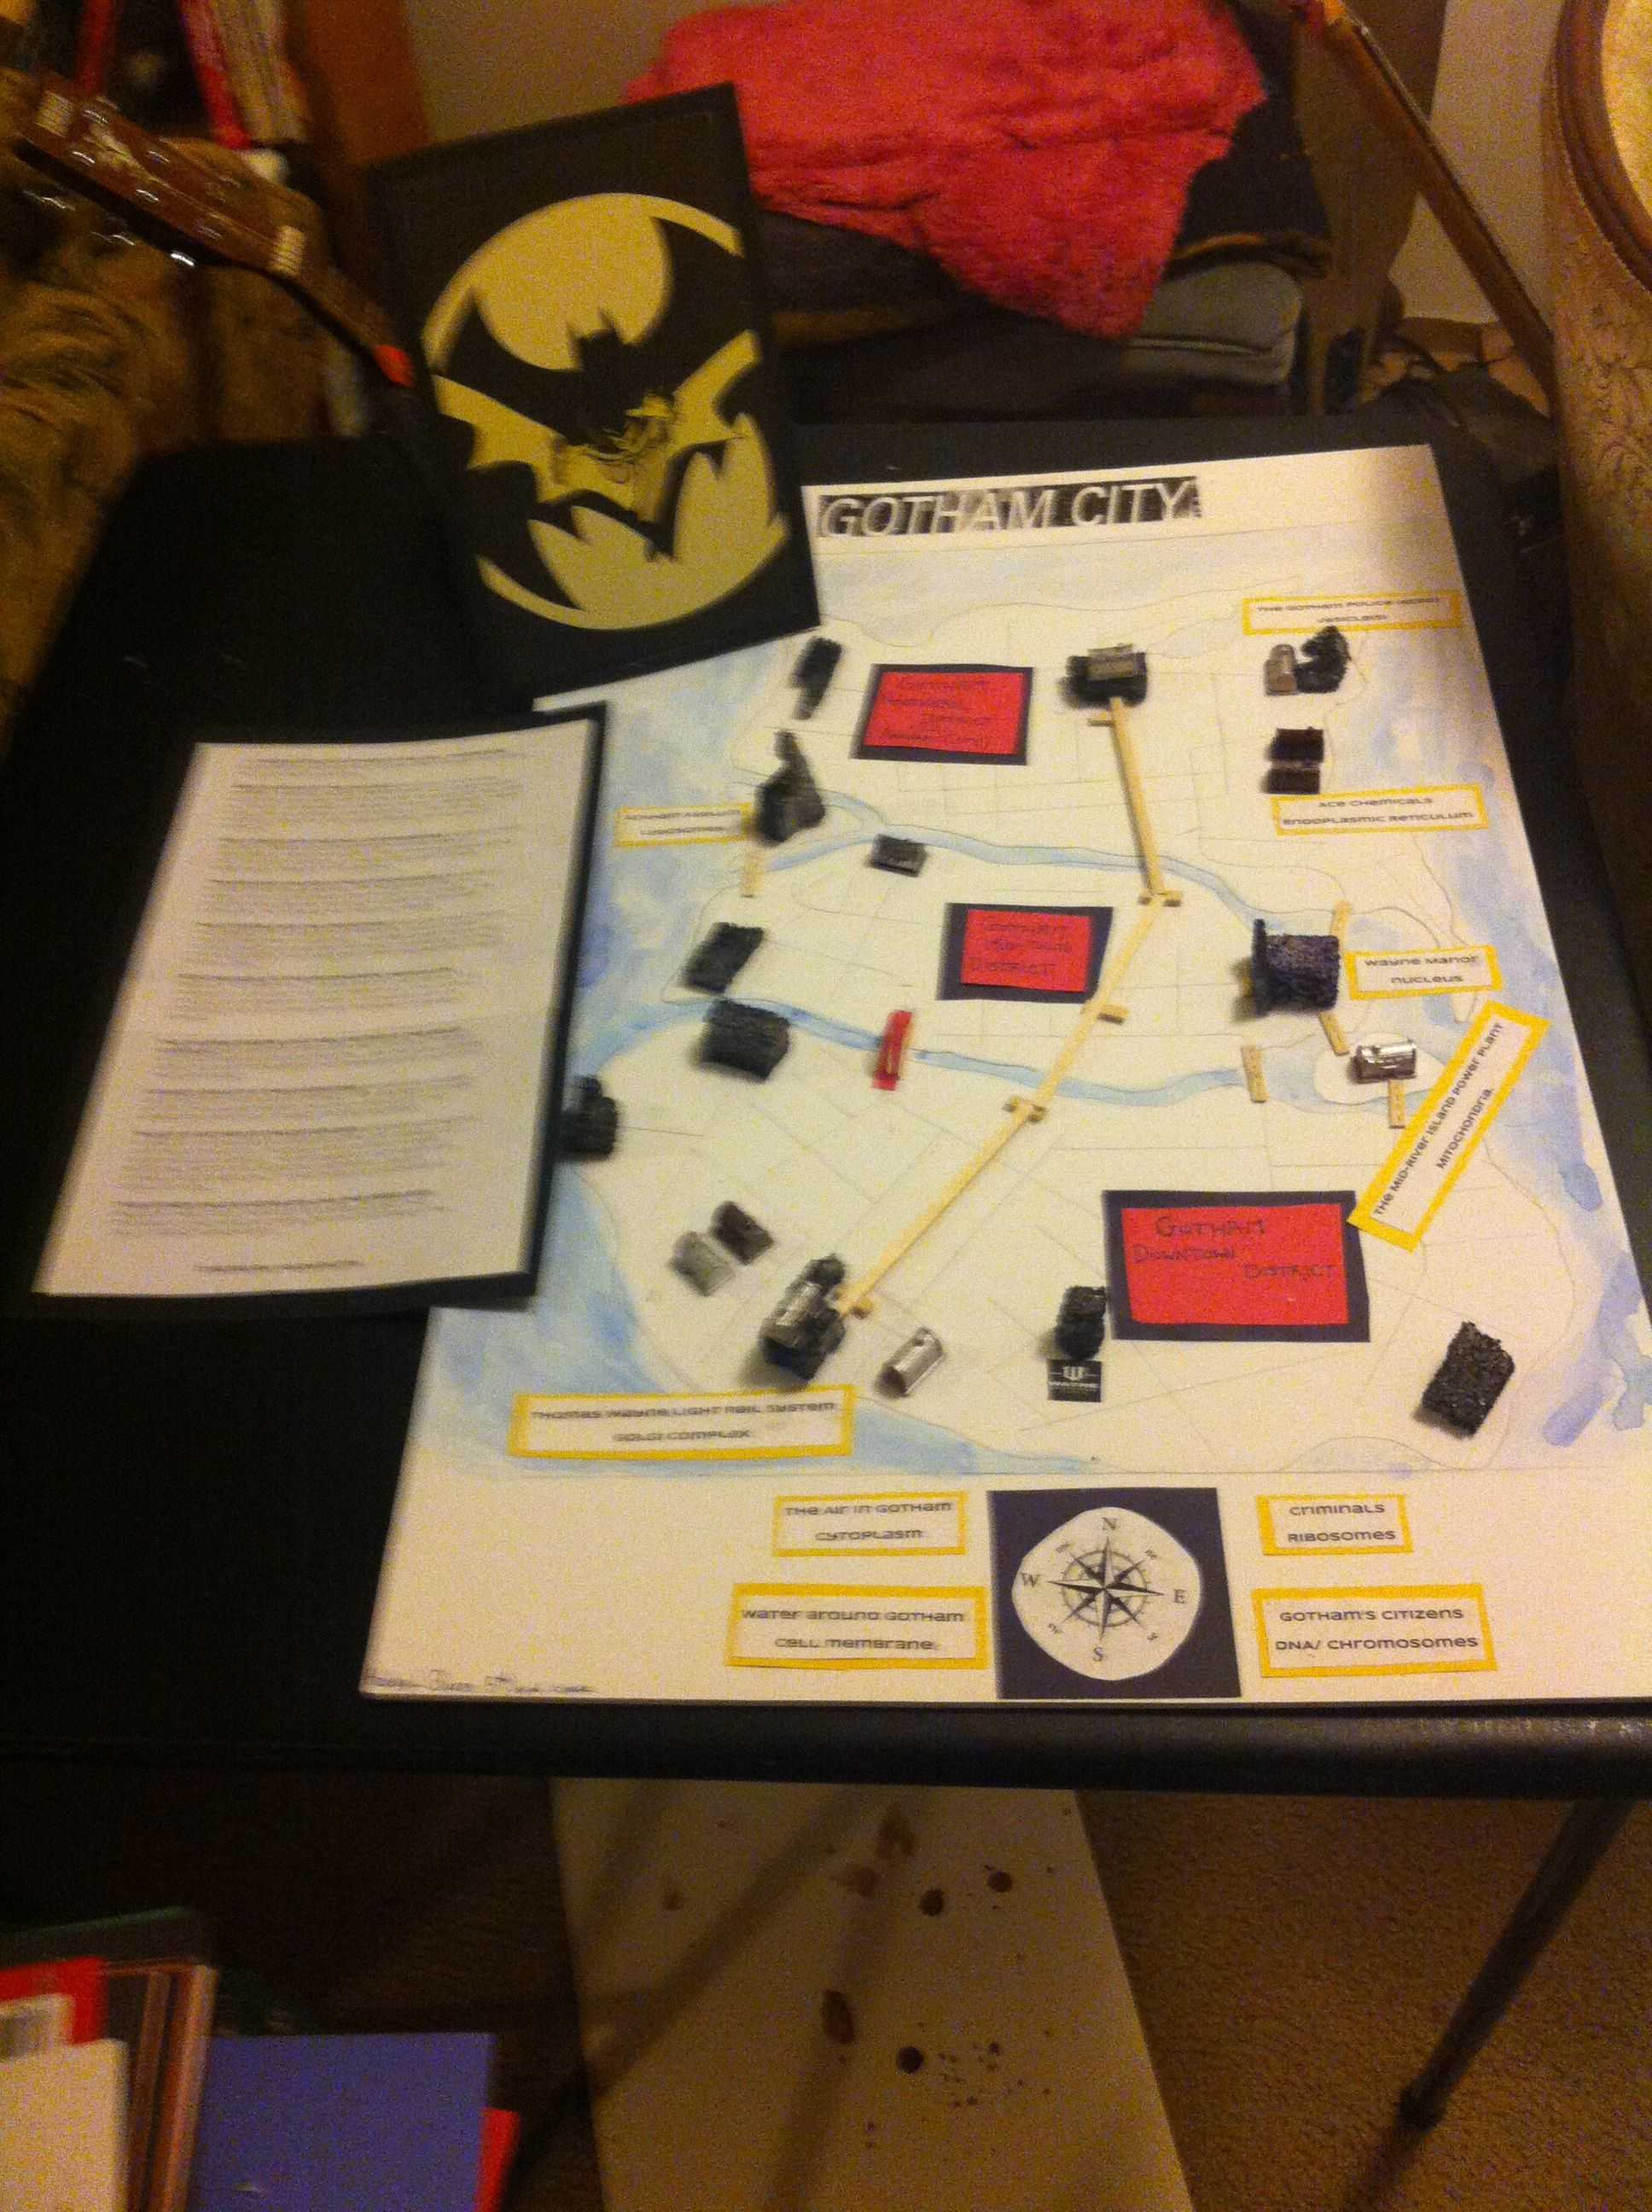 Cell Parts and Functions Worksheet Answers with Gotham City as Cell Analogy Project It Got An A